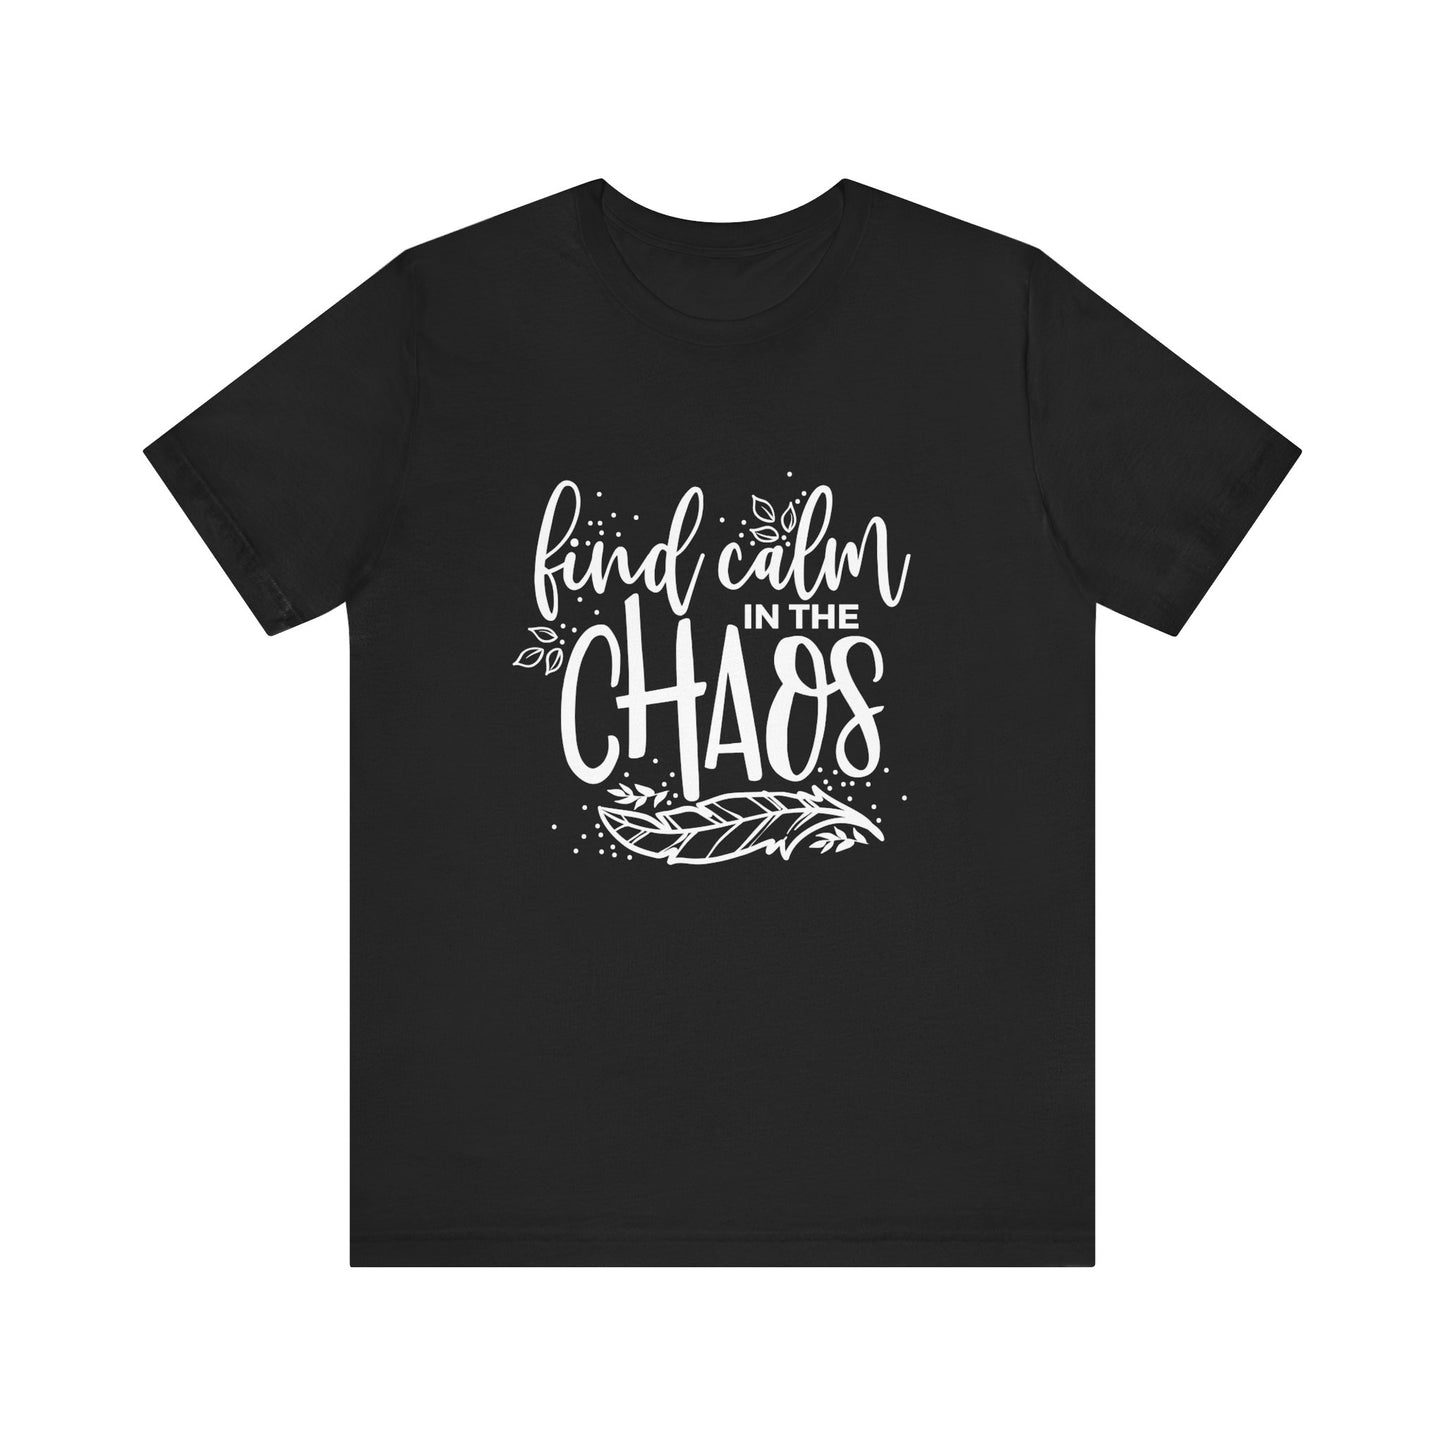 Find Calm in The Chaos - T-shirt